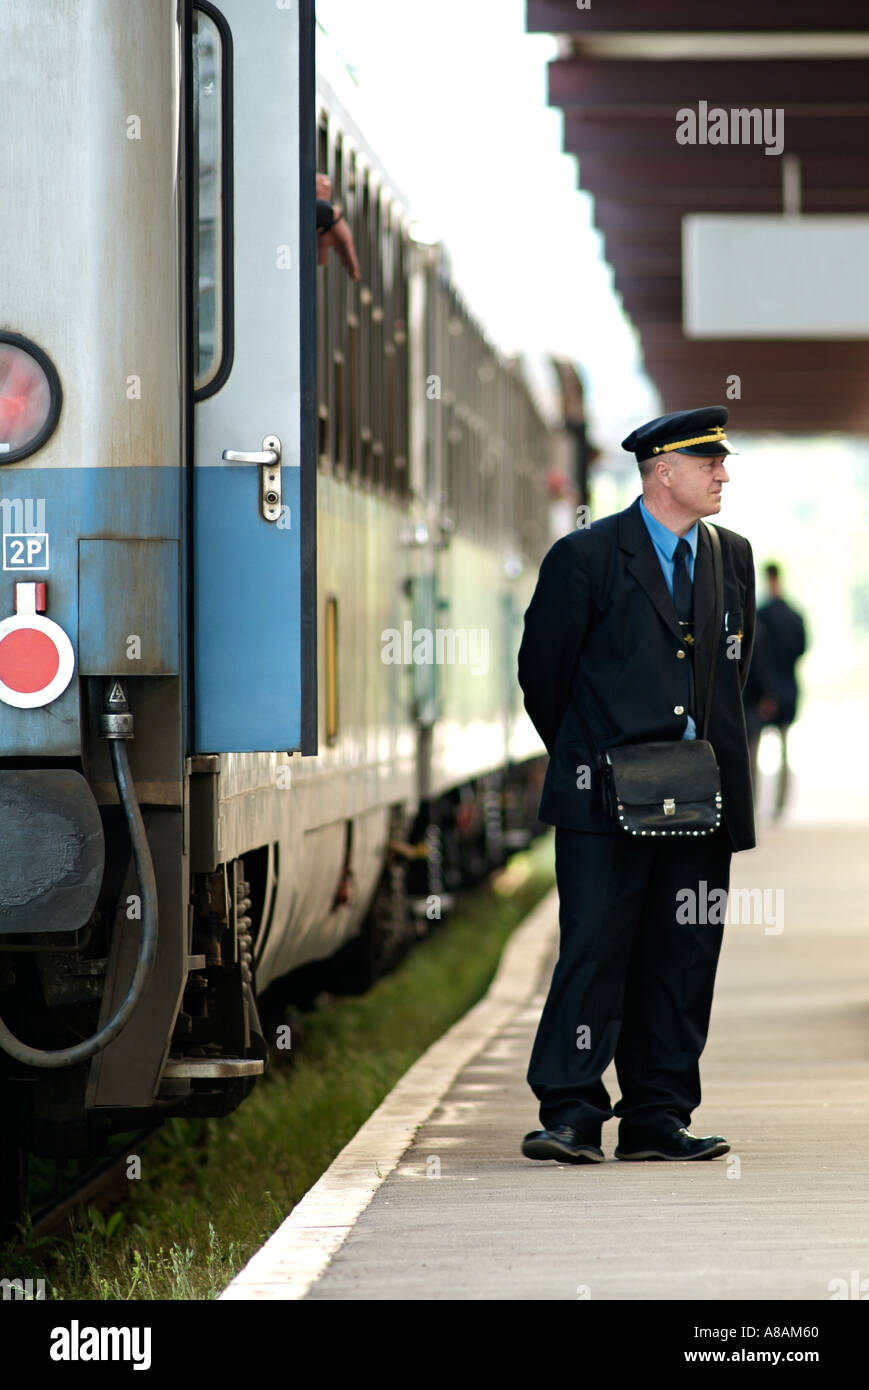 Railway Train Conductor Standing on a Station Platform Next to a Train Carriage. Stock Photo